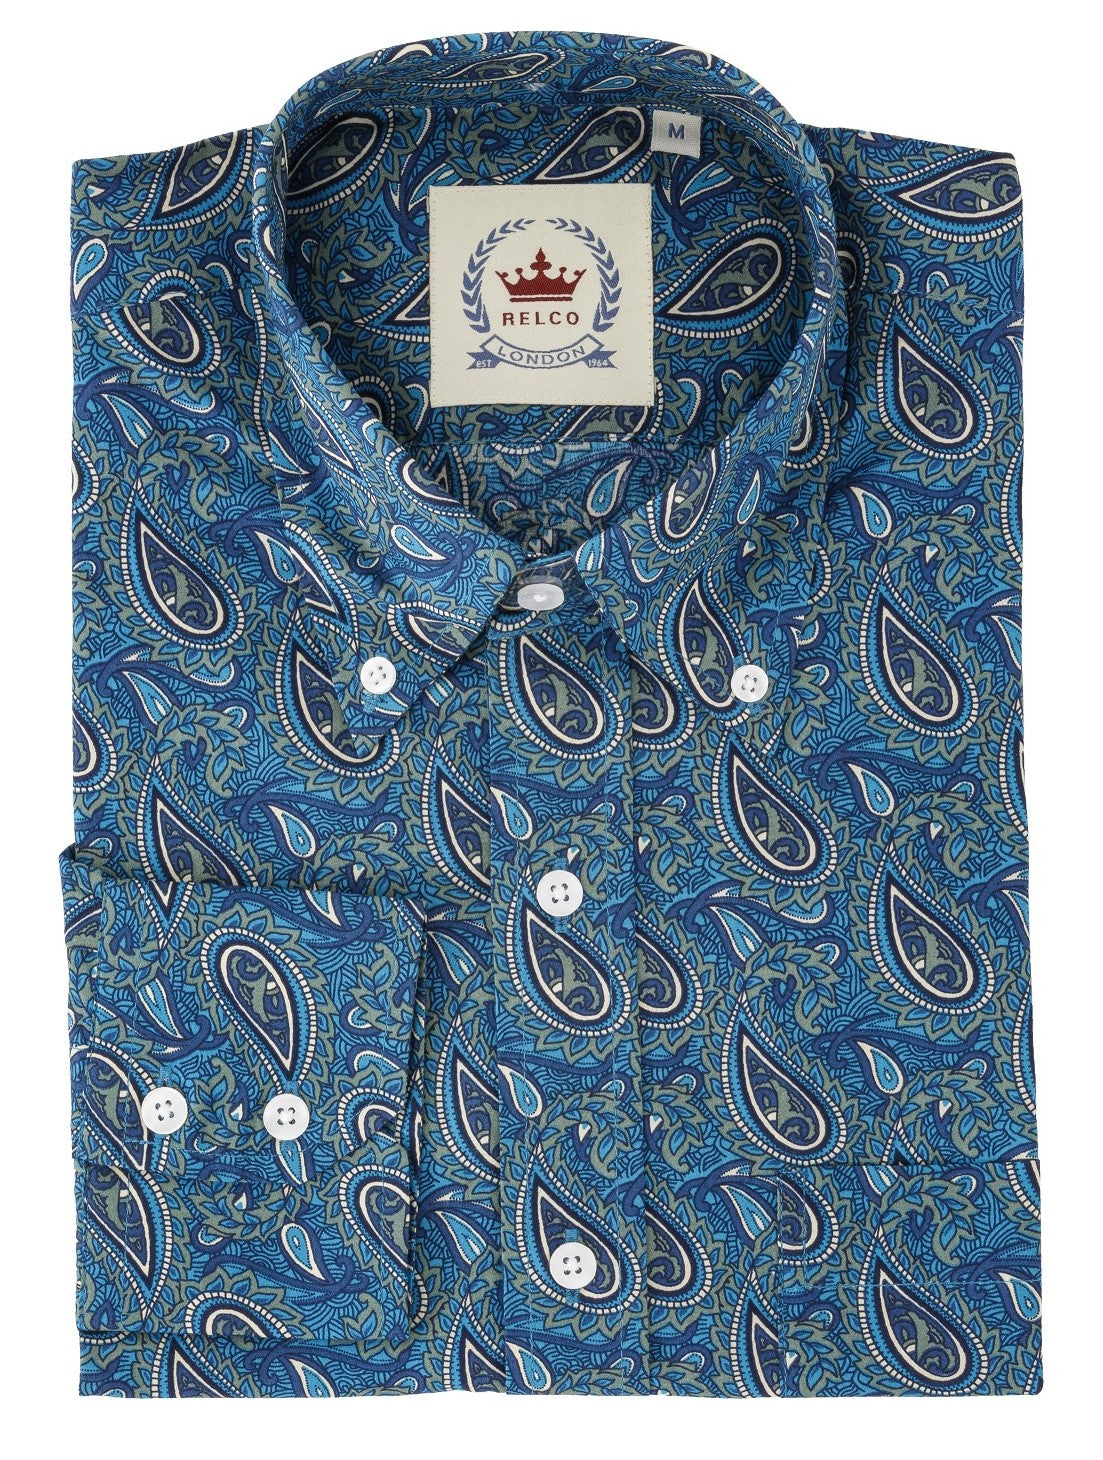 Relco Blue Paisley 100% Cotton Long Sleeved Button Down Shirts